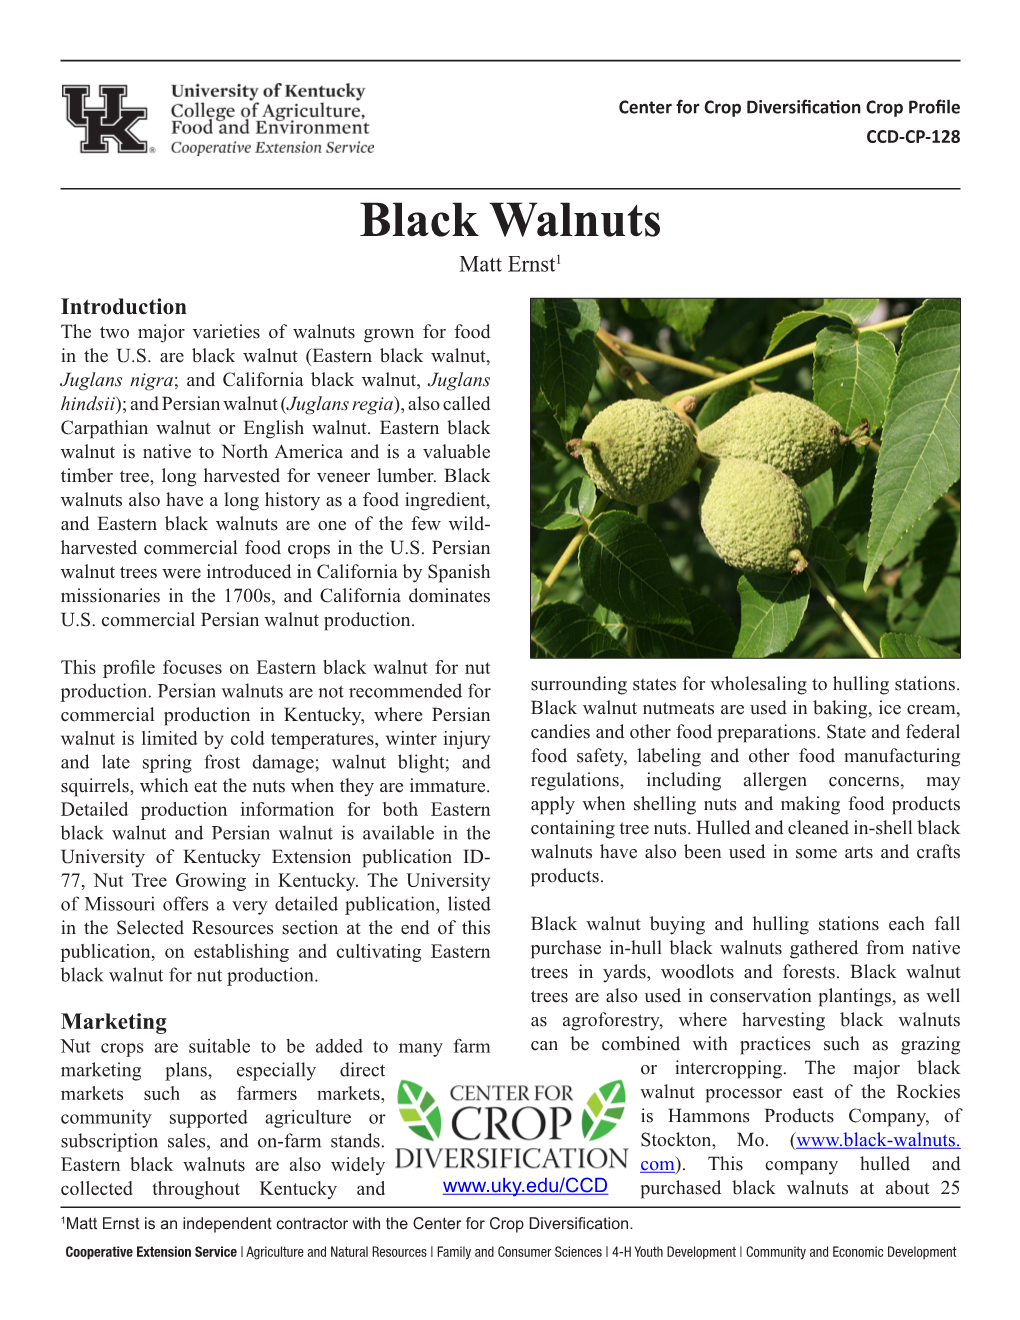 Black Walnuts Matt Ernst1 Introduction the Two Major Varieties of Walnuts Grown for Food in the U.S